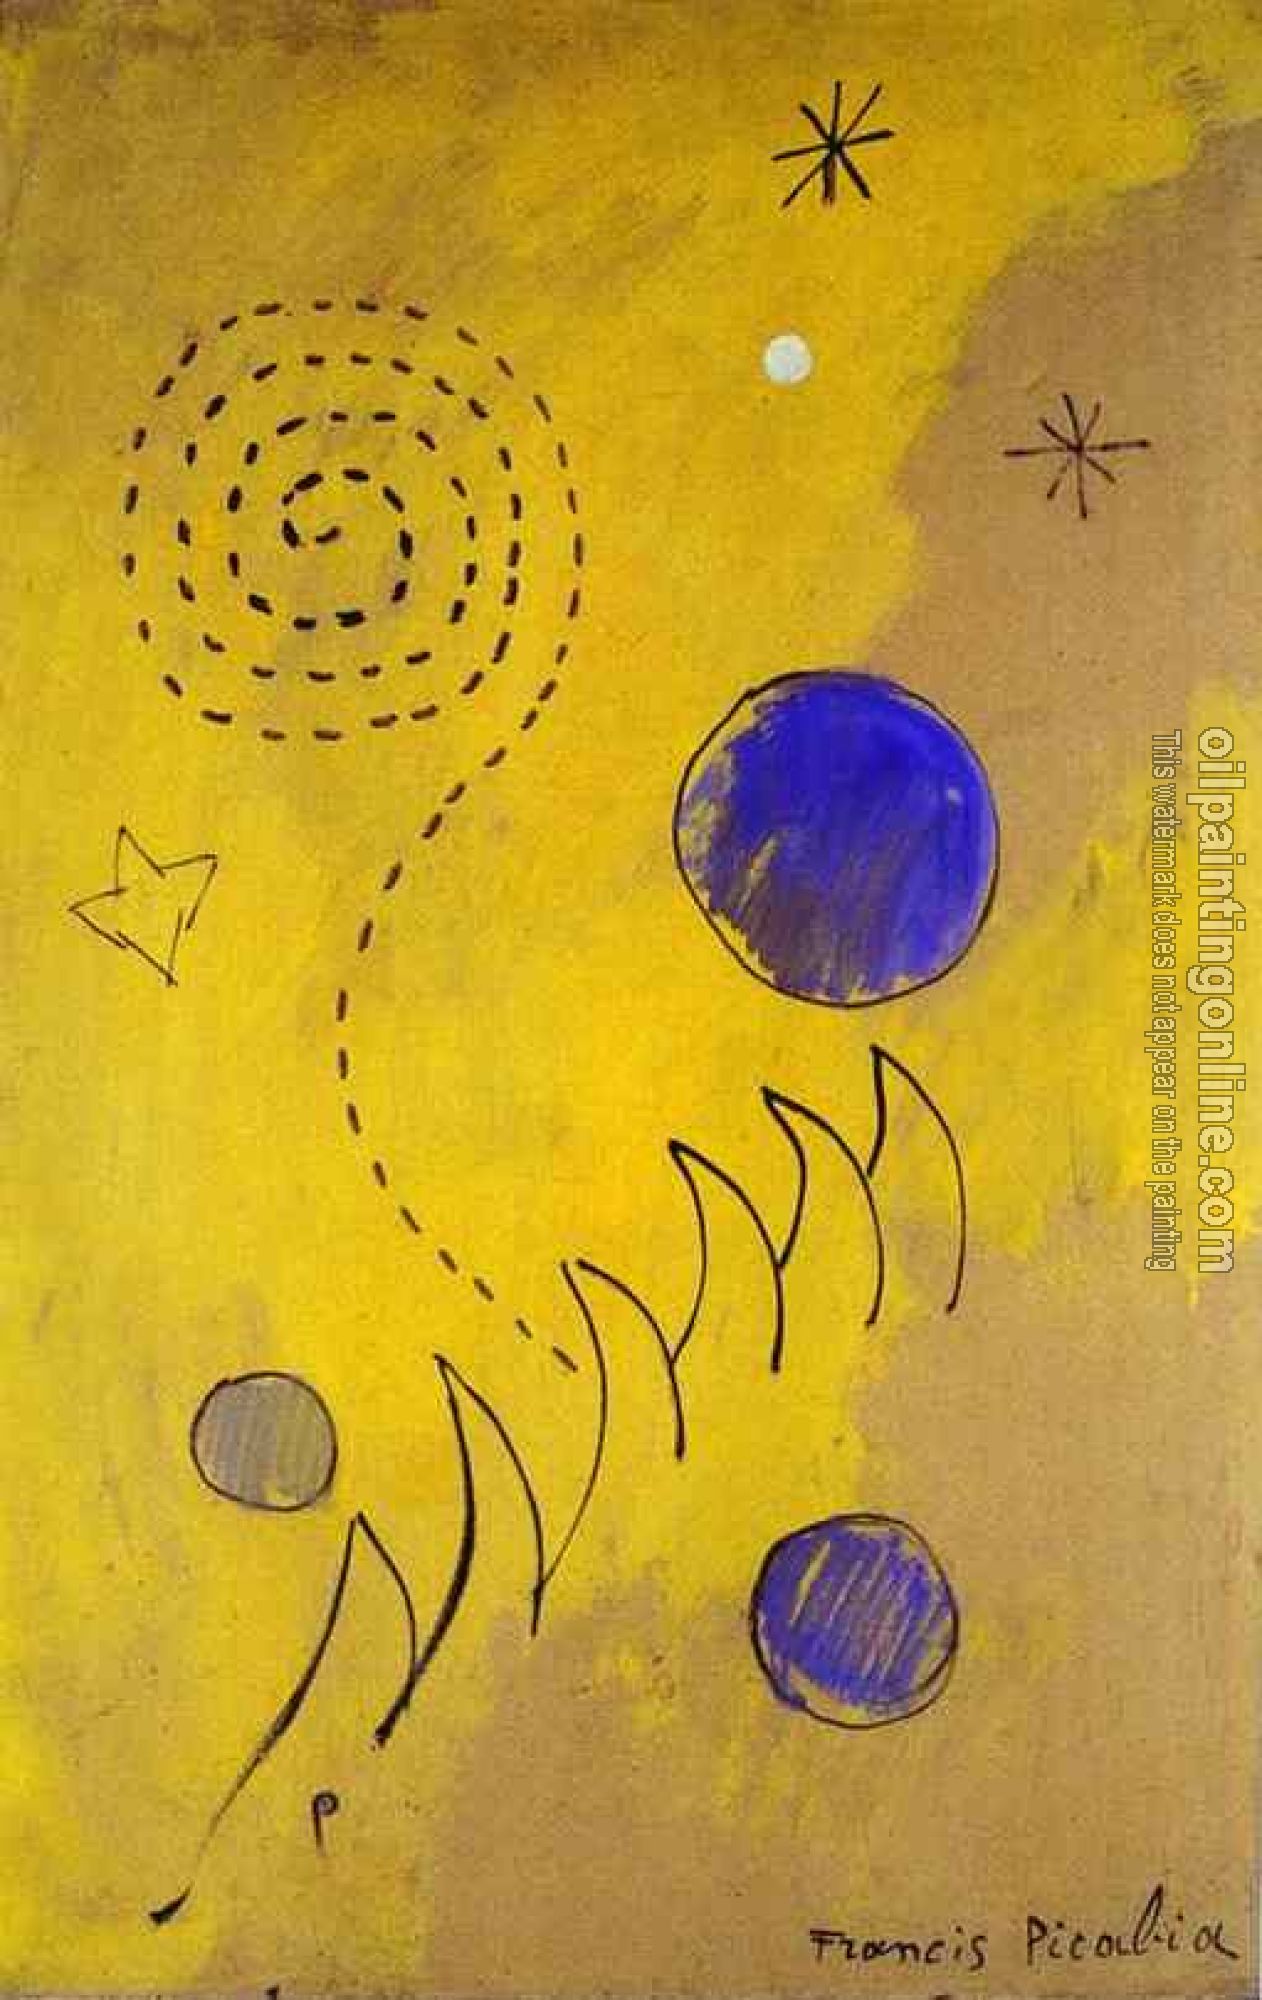 Picabia, Francis - Lausanne Abstract